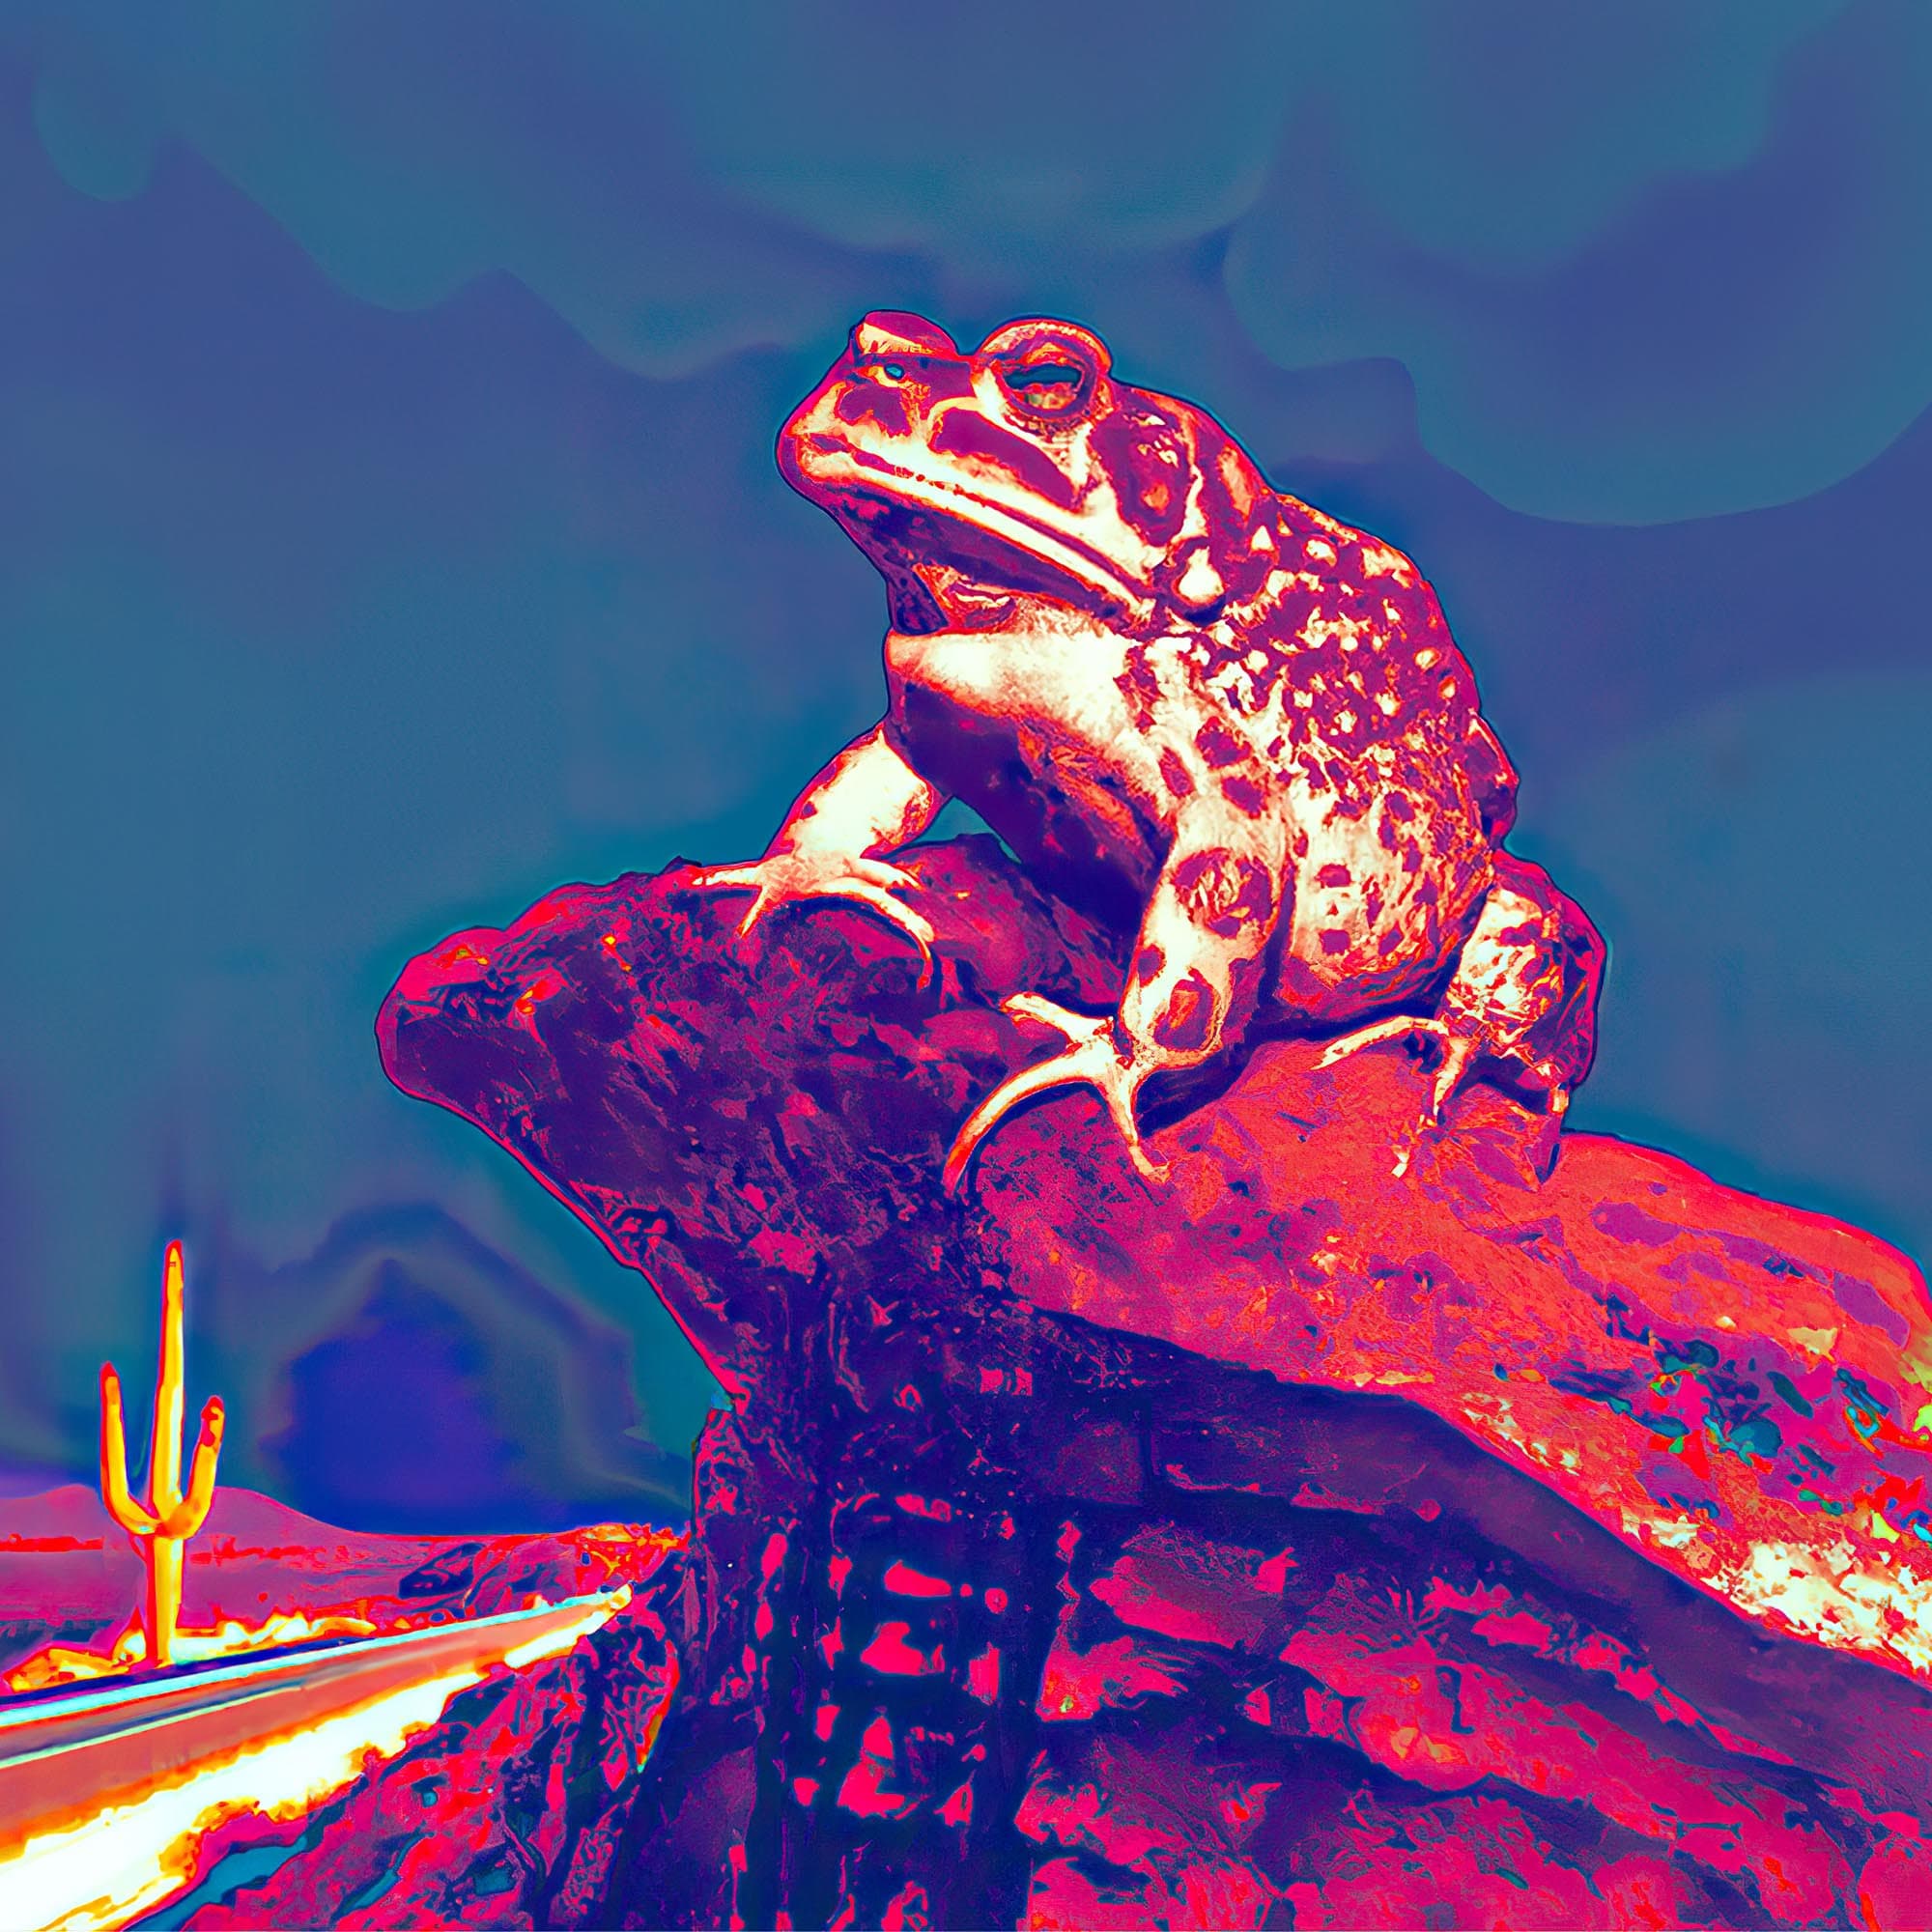 DMT Toad in the Sonoran Desert | Bufo Alvarius, DMT Psychedelic (Weed, 420, Cannabis) | Shamanic Vision Trippy Digital Art T-Shirt Tee